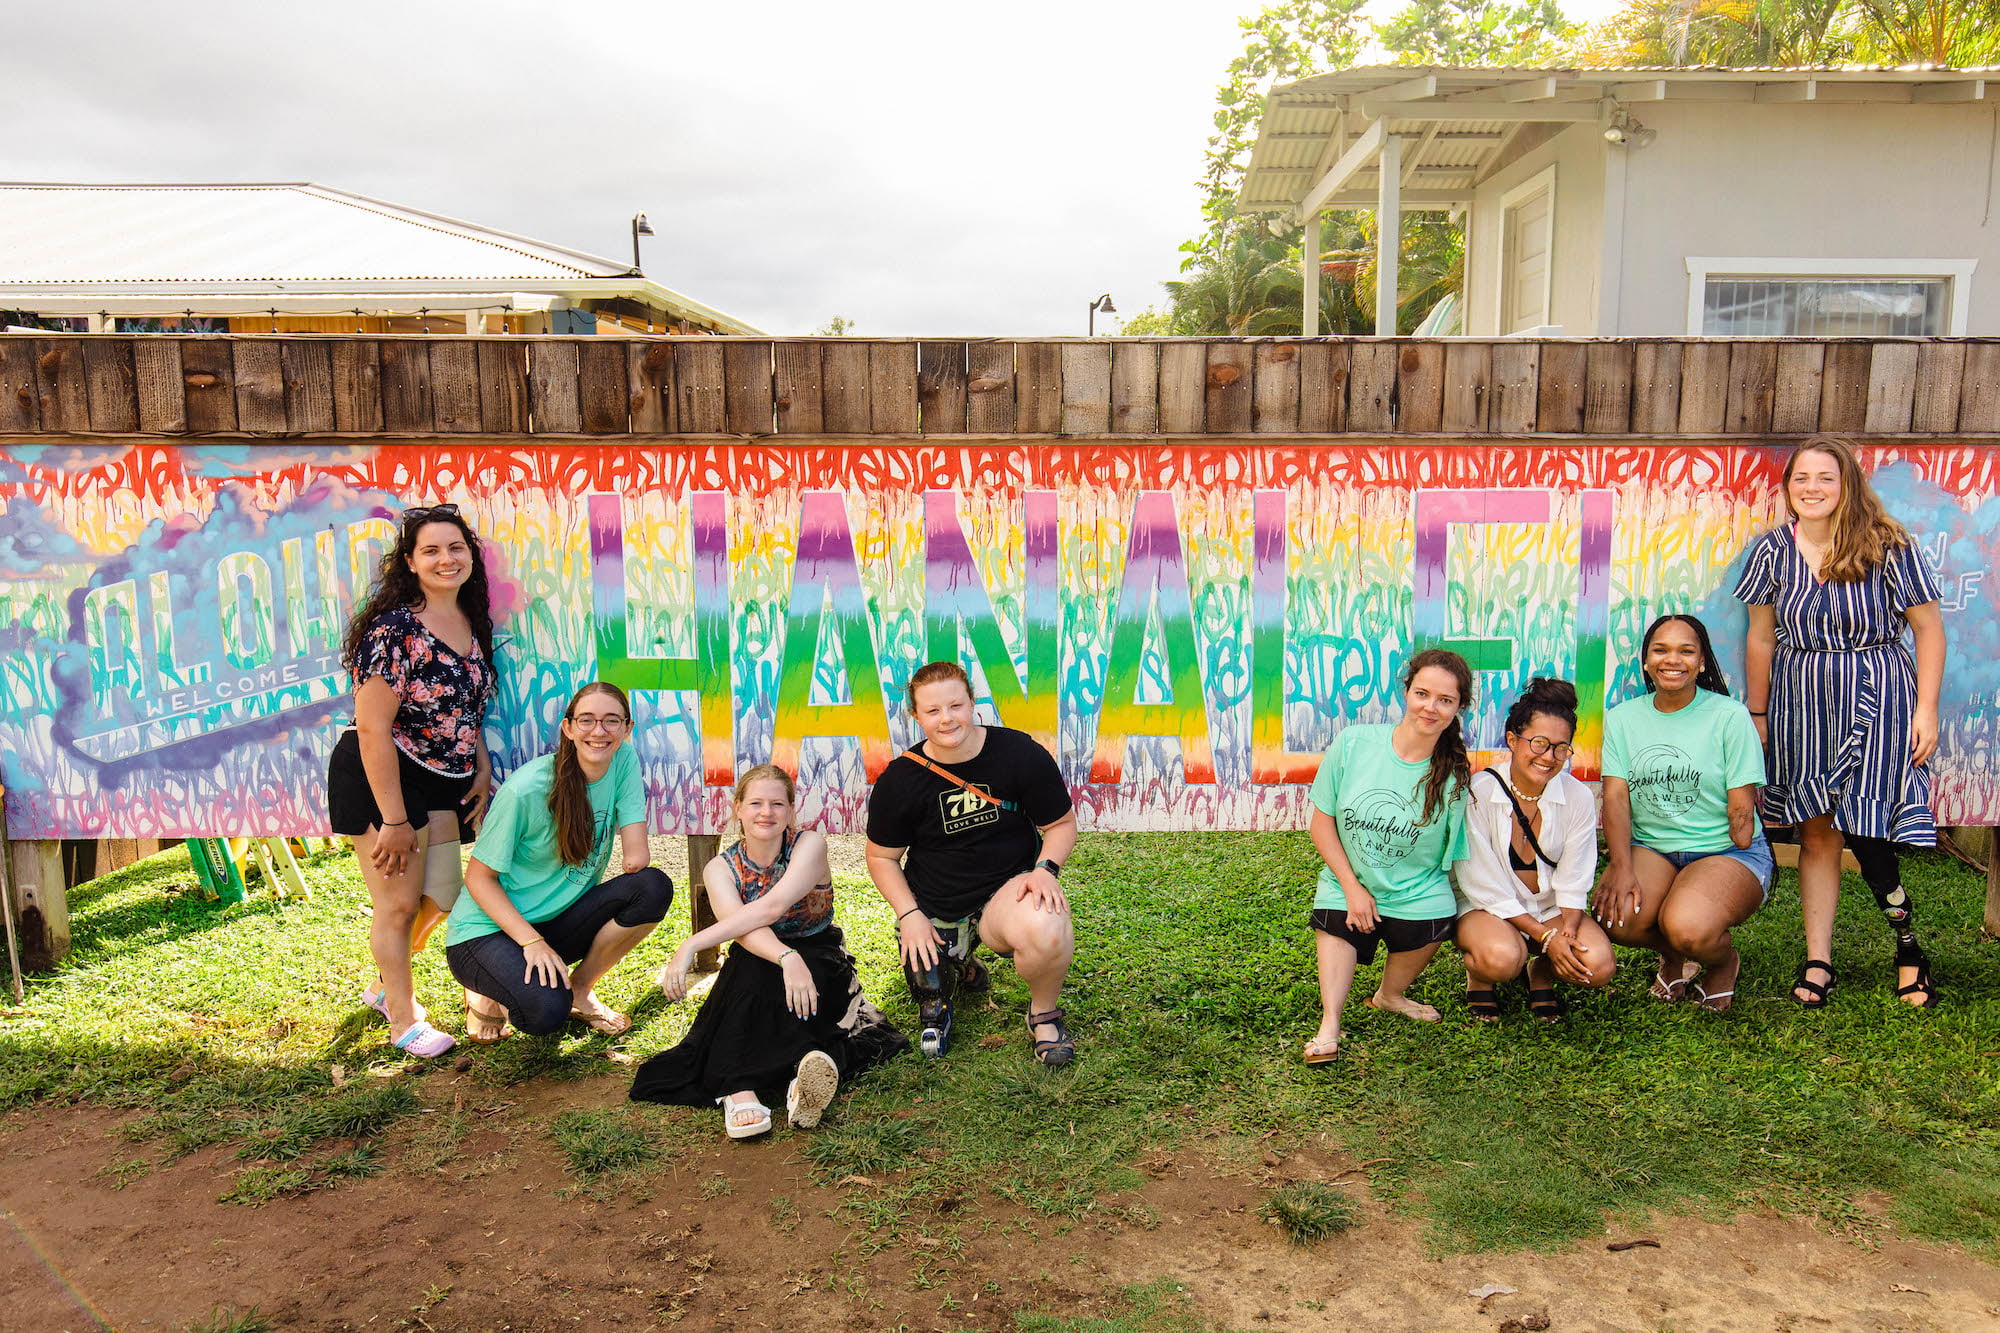 Attendees in front of the "Hanalei" sign at Wishing Well Shave Ice